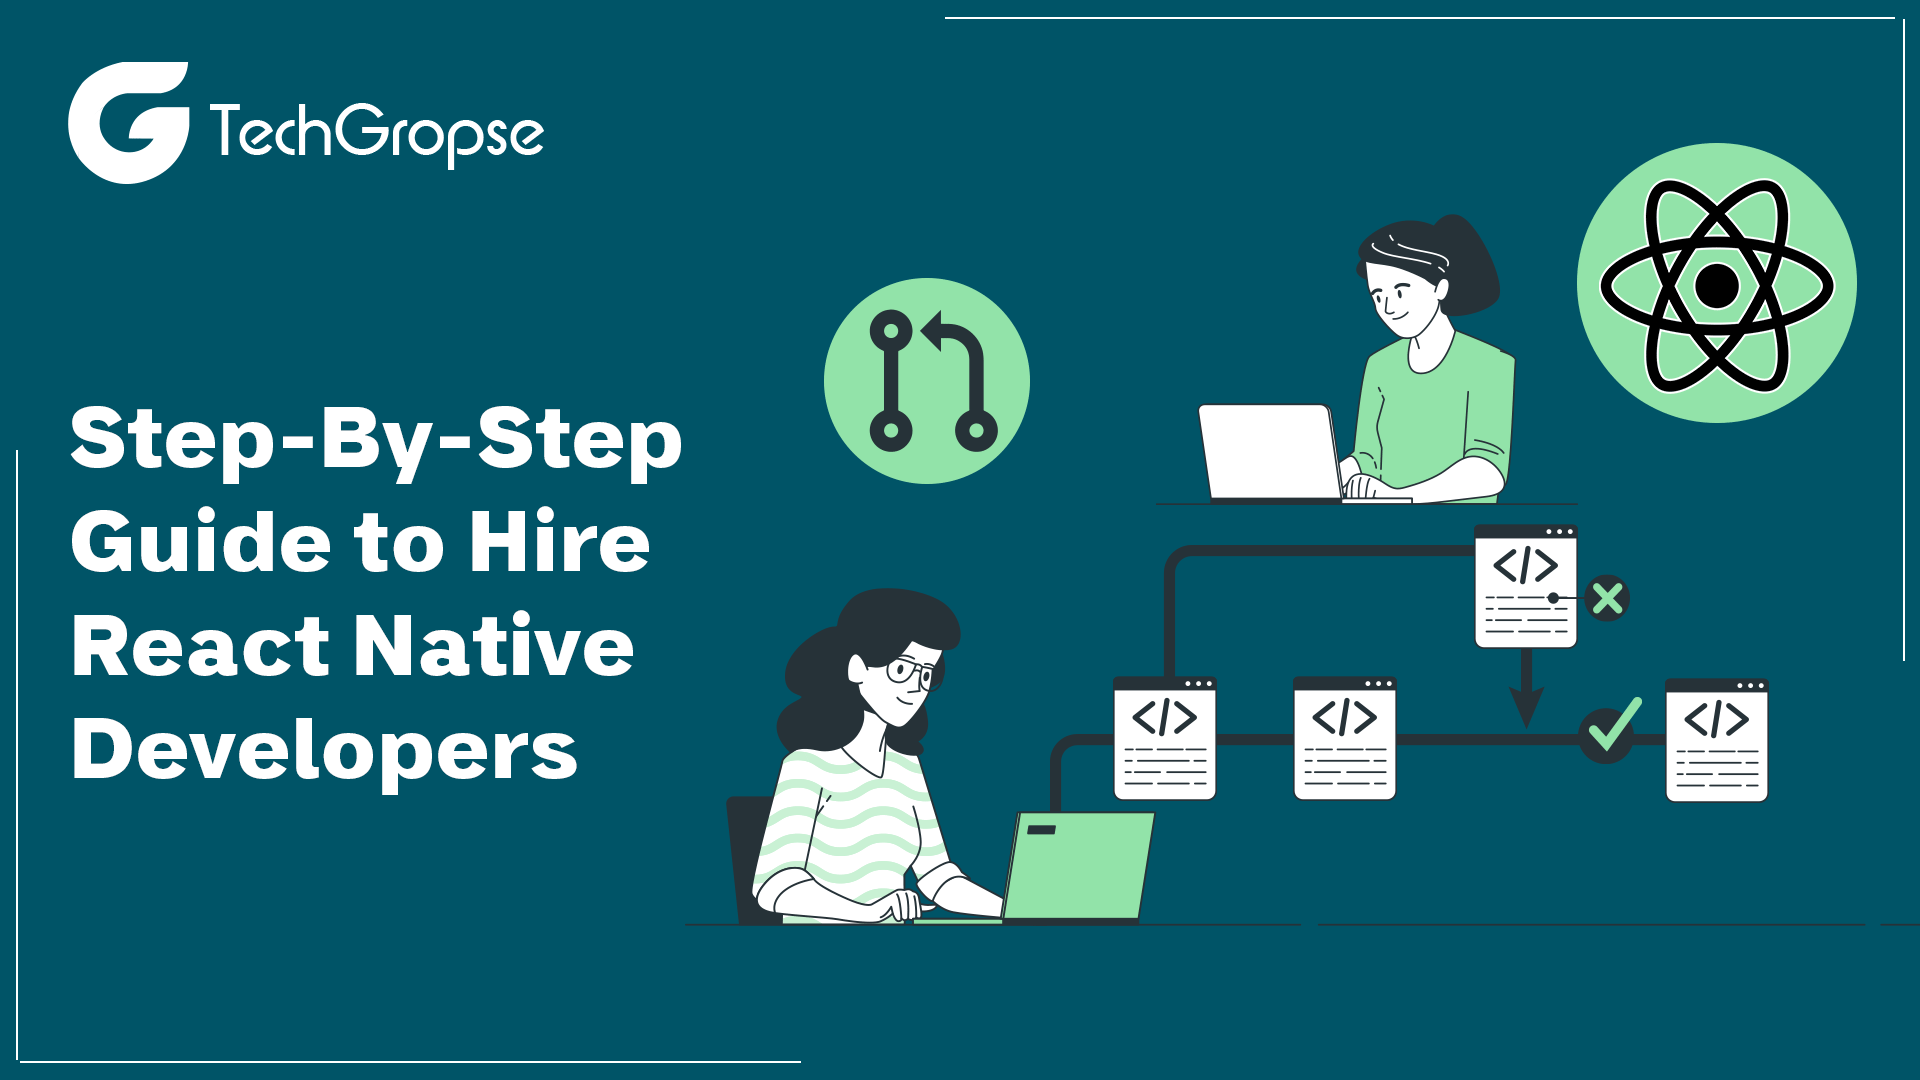 Step-By-Step Guide to Hire React Native Developers 